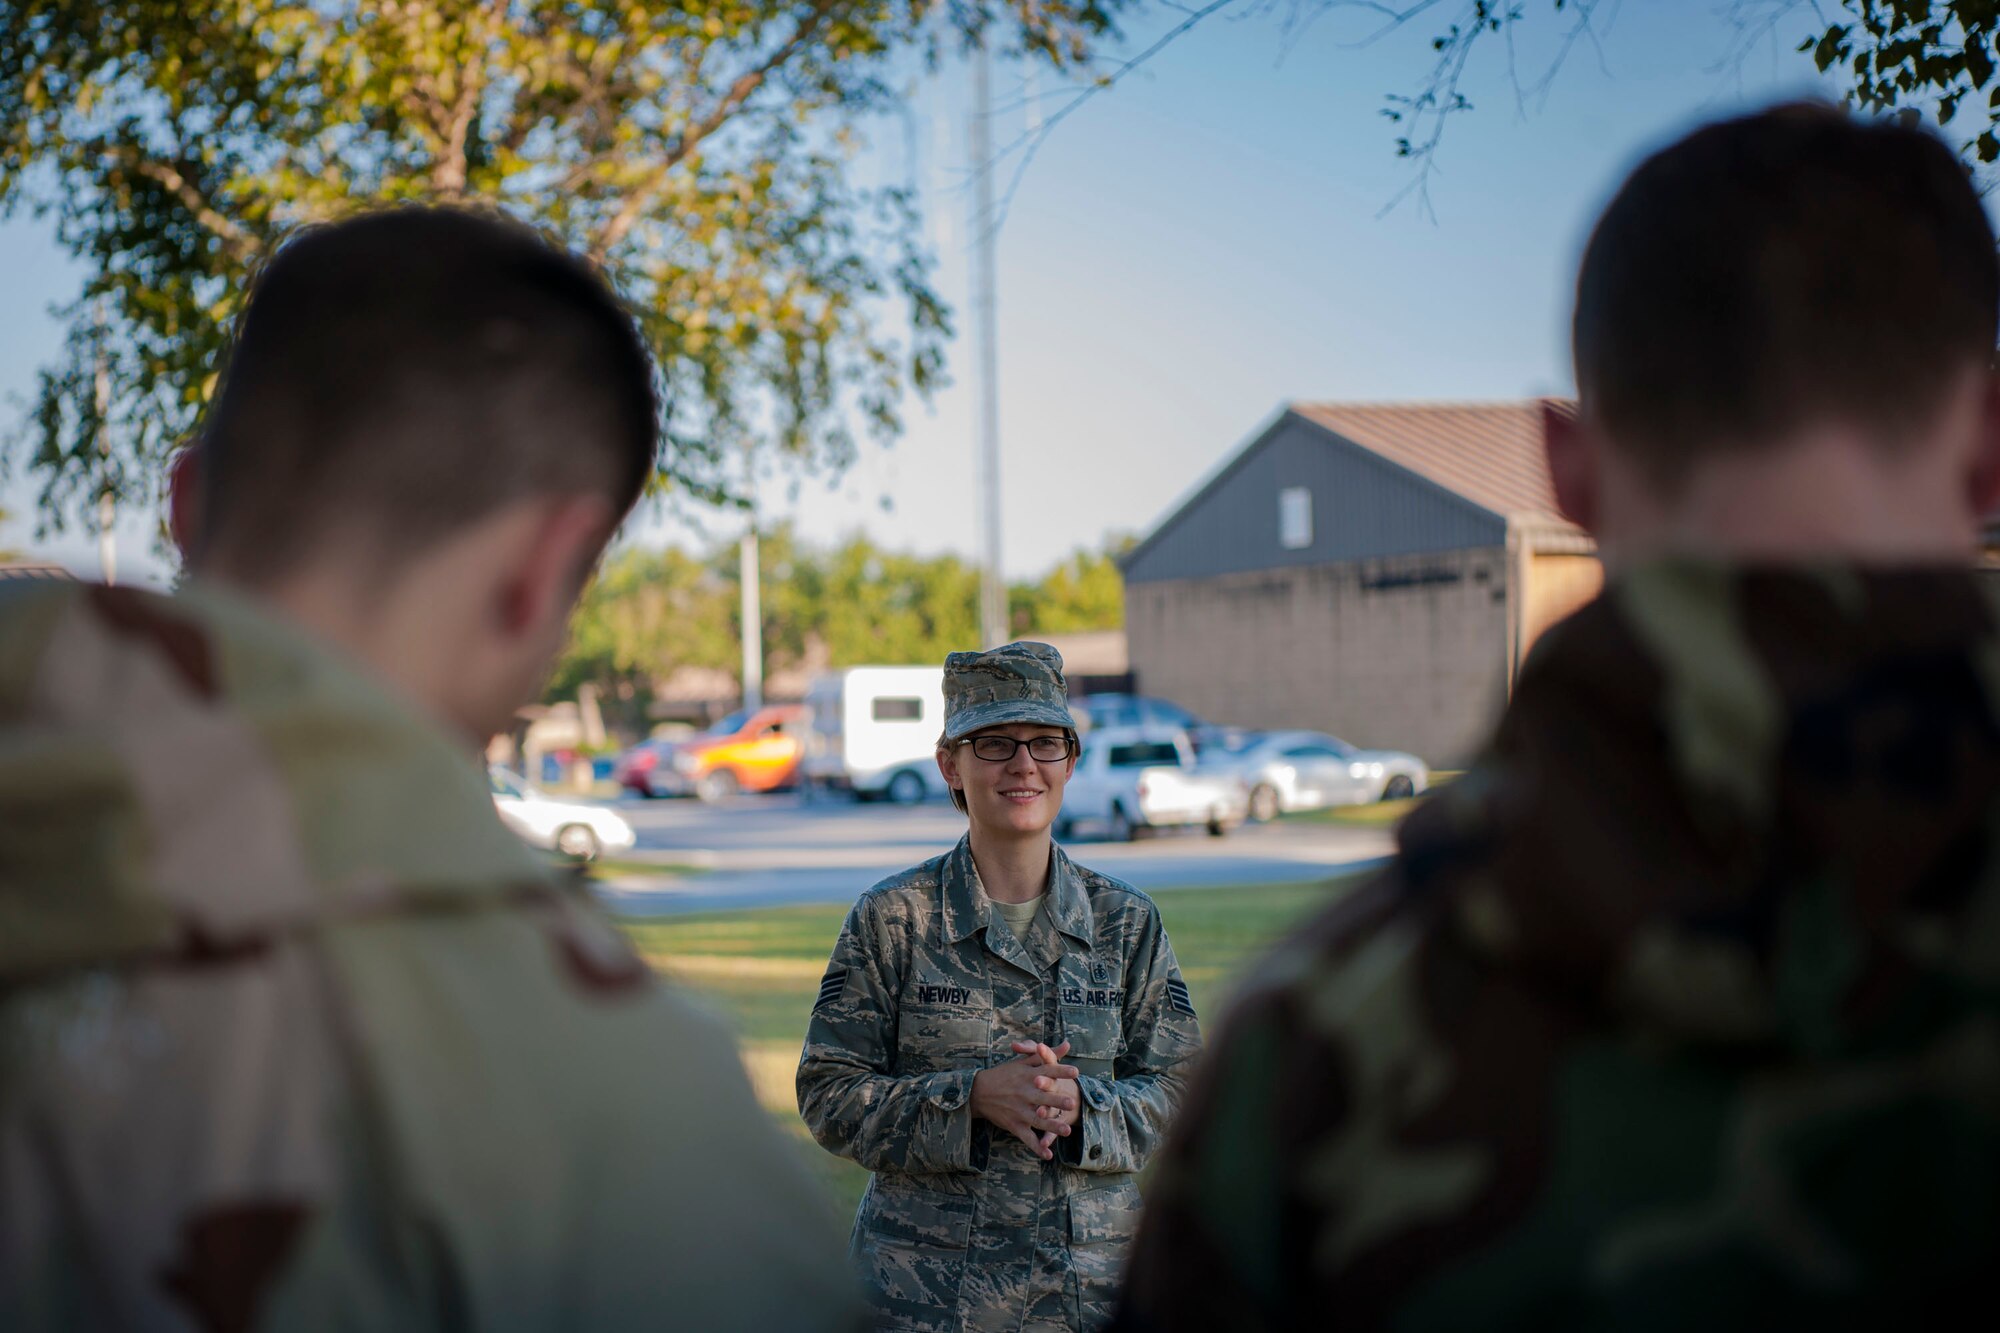 Staff Sgt. Julie Newby, 23d Medical Support Squadron physical evaluation board liaison officer, instructs Airmen from the 23d Civil Engineer Squadron during an Ability to Survive and Operate (ATSO) Rodeo, Sept. 20, 2018, at Moody Air Force Base, Ga. Approximately 2,000 Airmen executed self-aid and buddy care, security and chemical attack avoidance missions under duress in a simulated chemical warfare environment. Testing and enhancing their operational readiness, this prepared the 23d Wing for the upcoming Phase II exercise during Nov. 5-8, 2018, which will be conducted for the first time in seven years. (U.S. Air Force photo by Airman Taryn Butler)